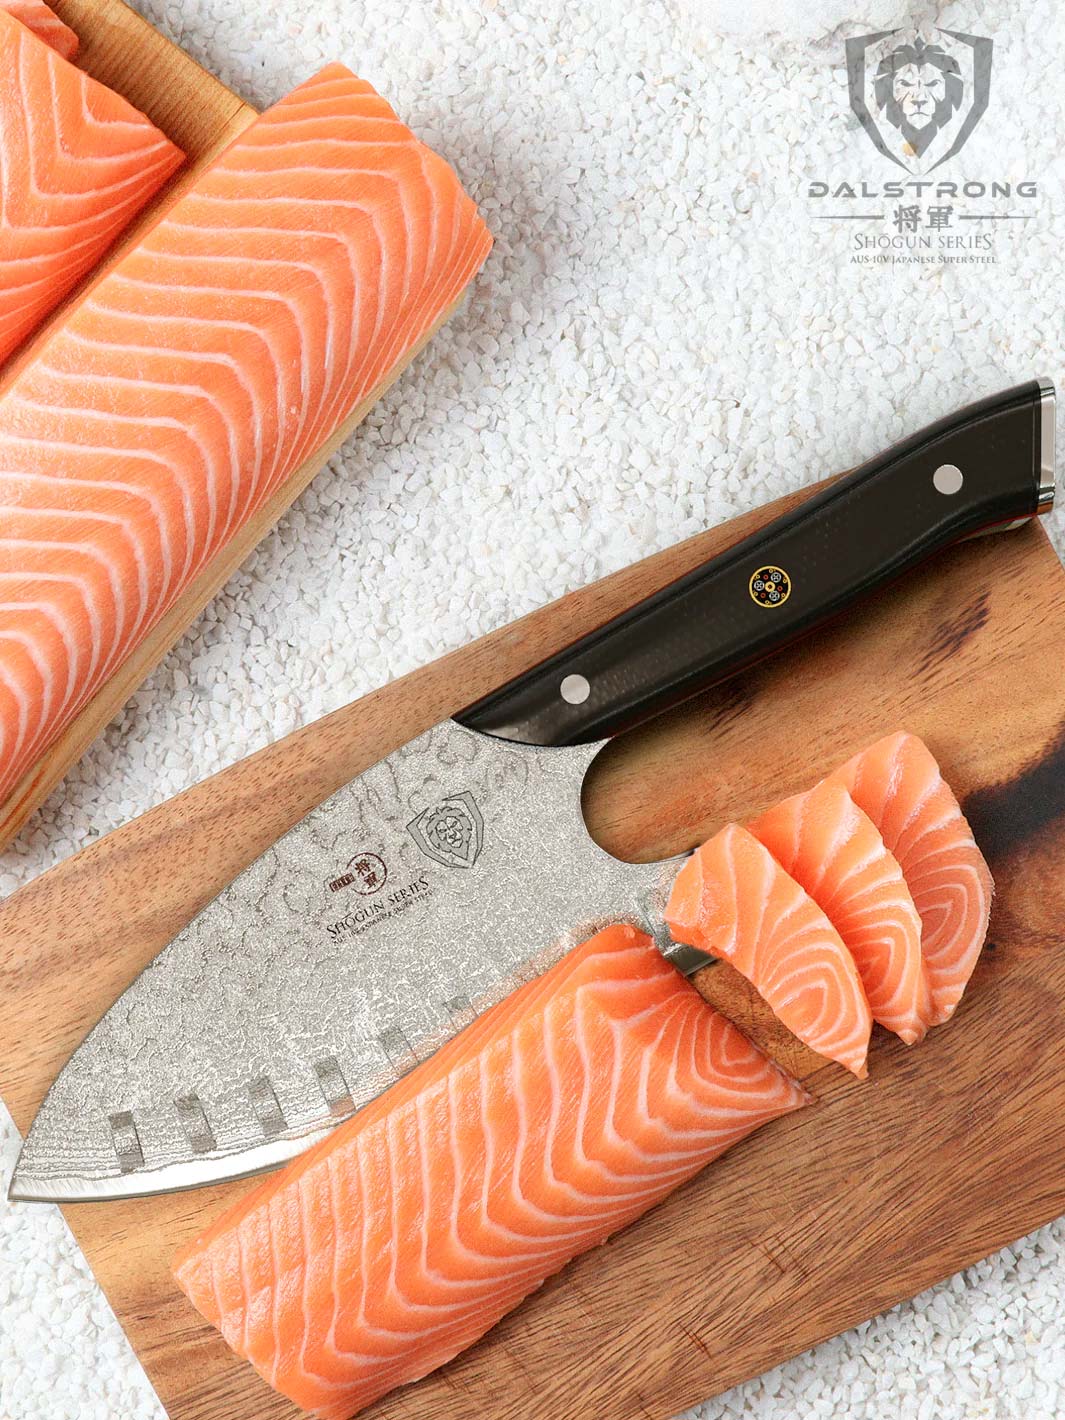 Dalstrong shogun series 8 inch guardian chef knife with black handle and slices of fish meat on a wooden board.